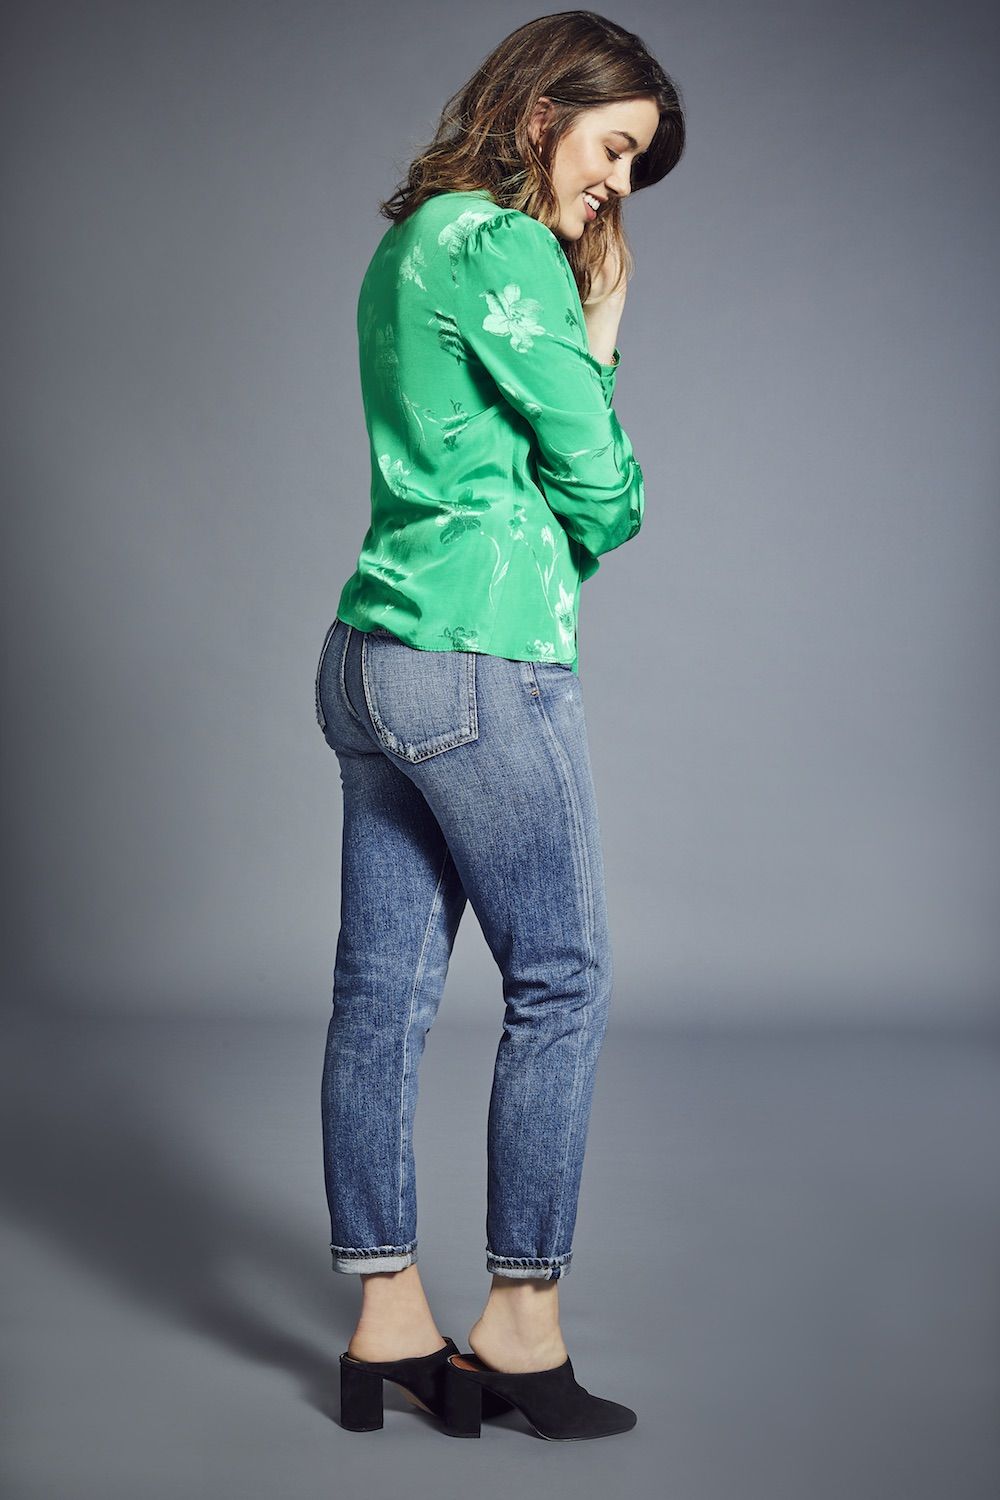 best jeans for girls with big butts